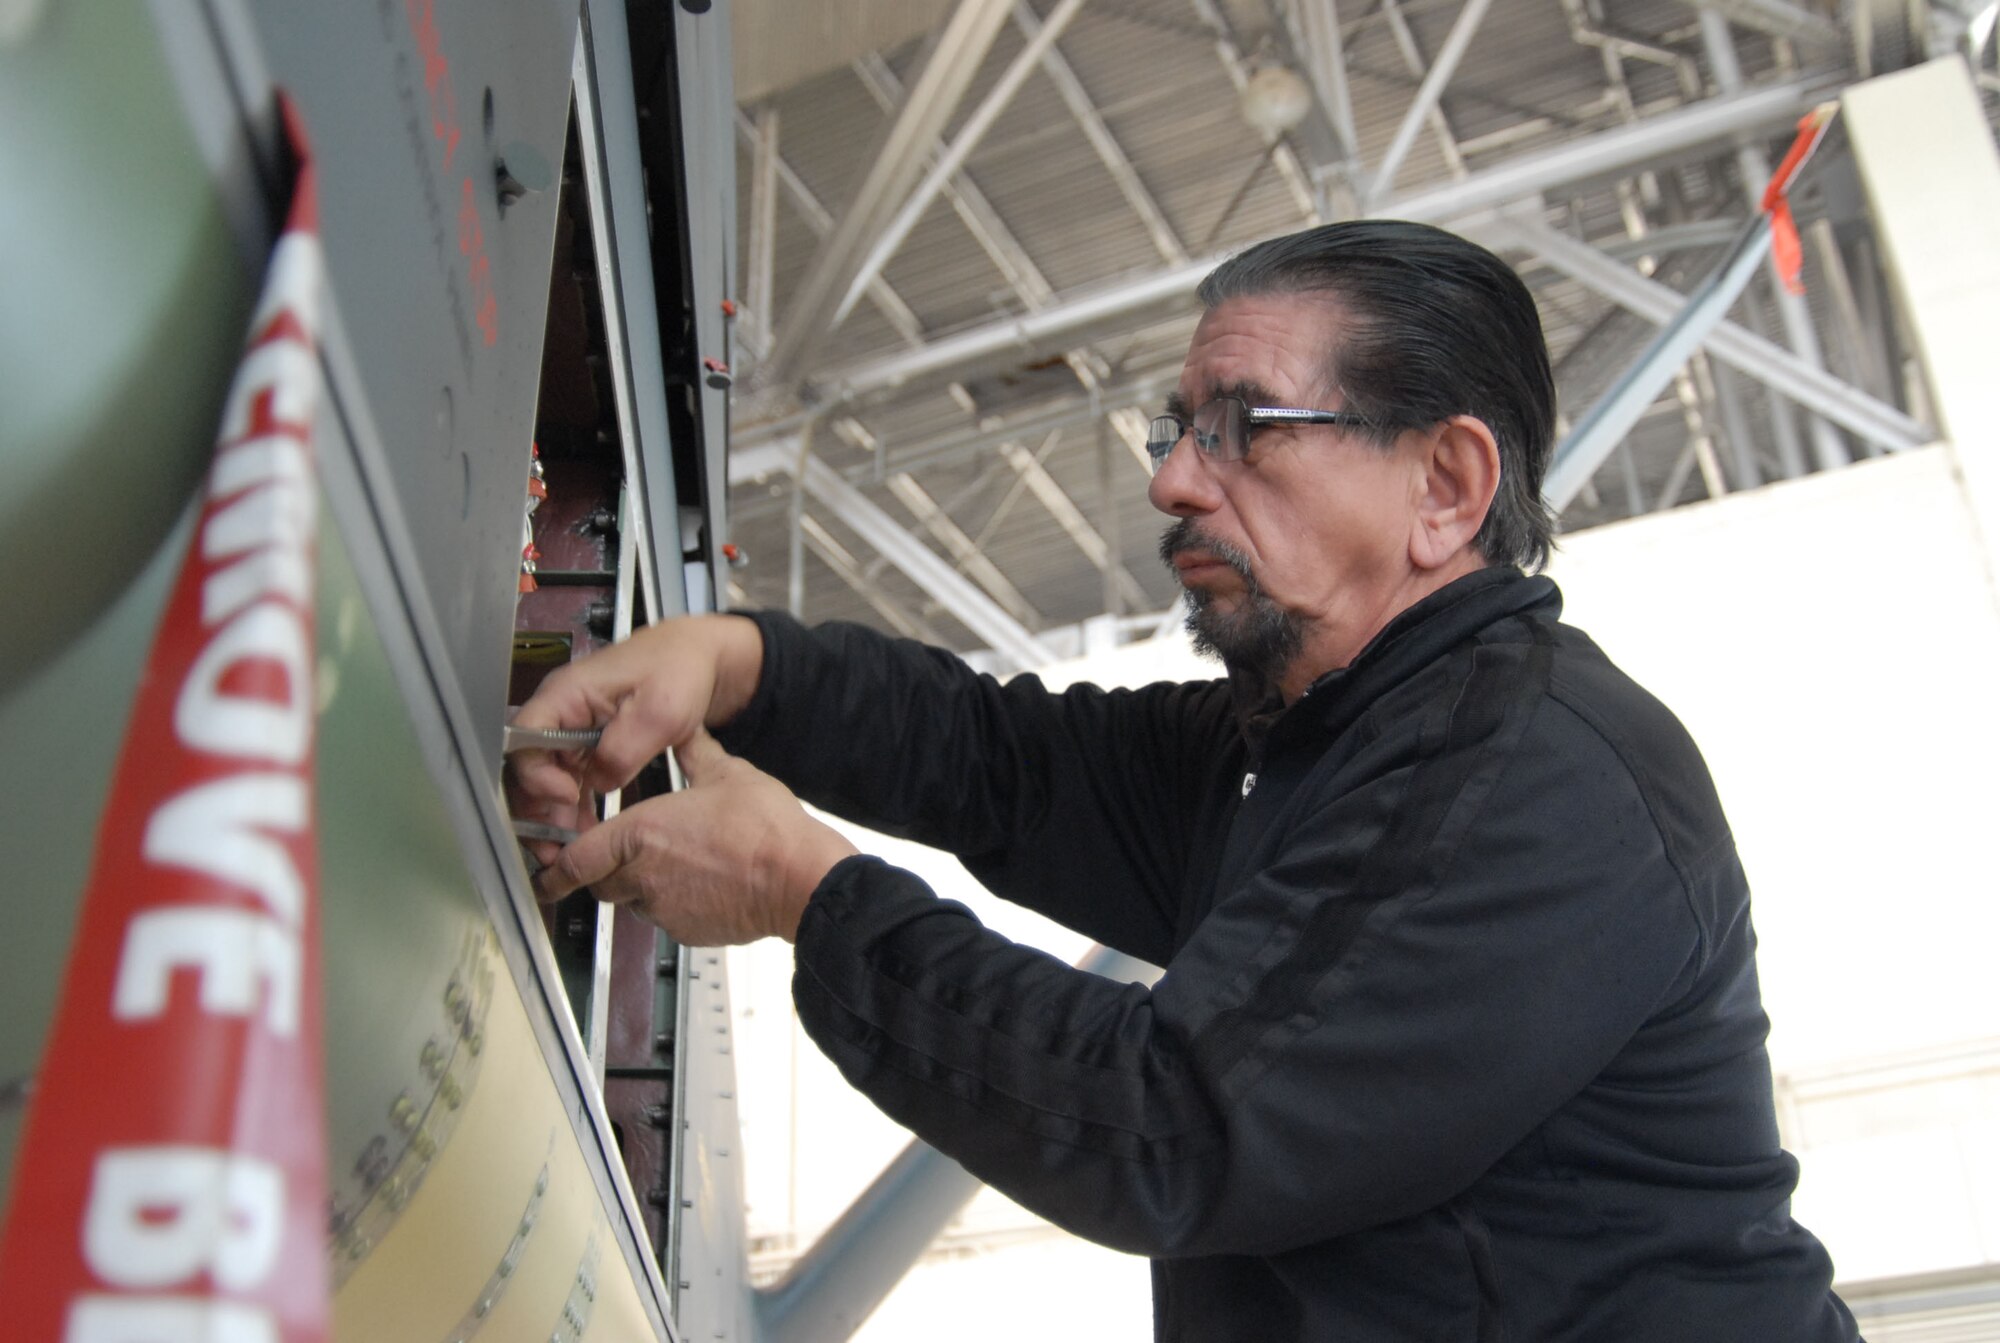 Francisco Rodriguez, Northrop Grumman flight test technician, tightens a connection in the power distribution controller of the RQ-4 Global Hawk Block 30. The aircraft arrived at Edwards on a ferry flight Nov. 16 from the Northrop Grumman Palmdale, Calif., facility. (Photo by Senior Airman Julius Delos Reyes)